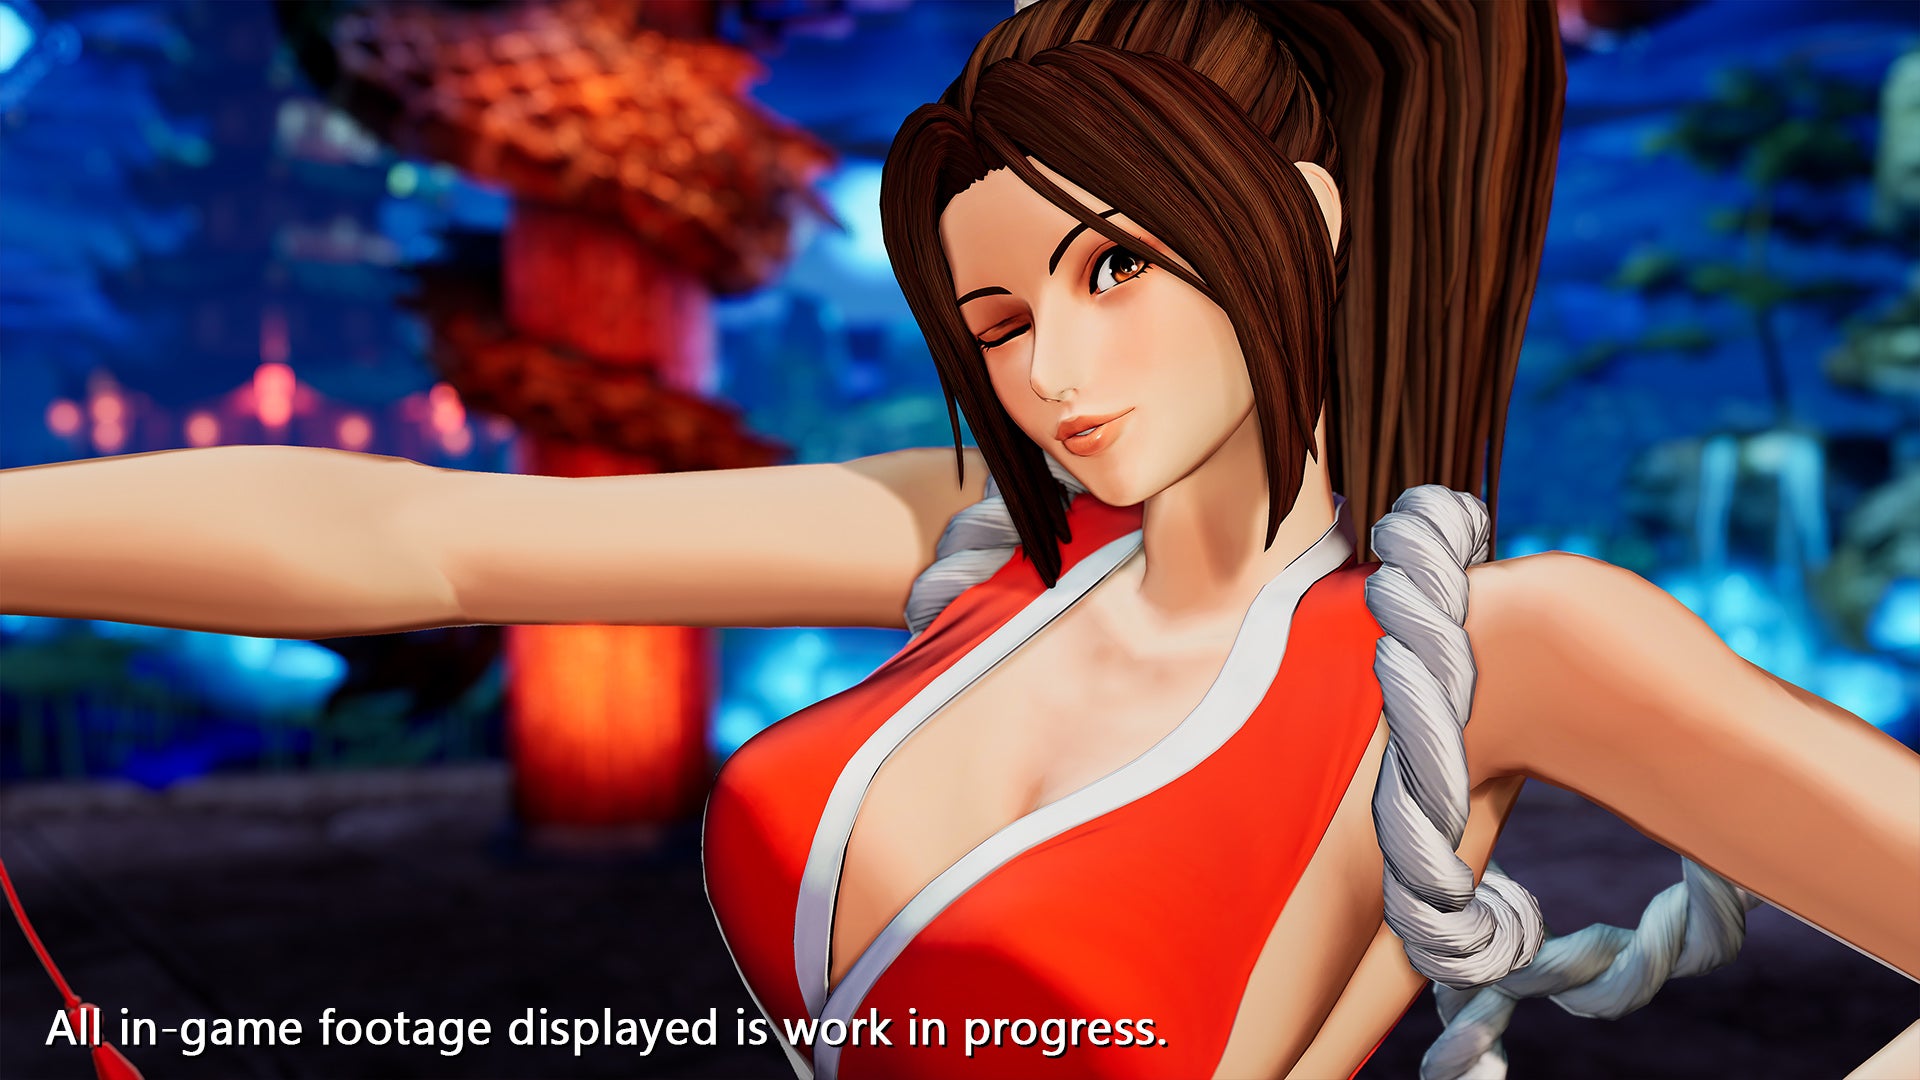 
King of Fighters 15 launches February 2022